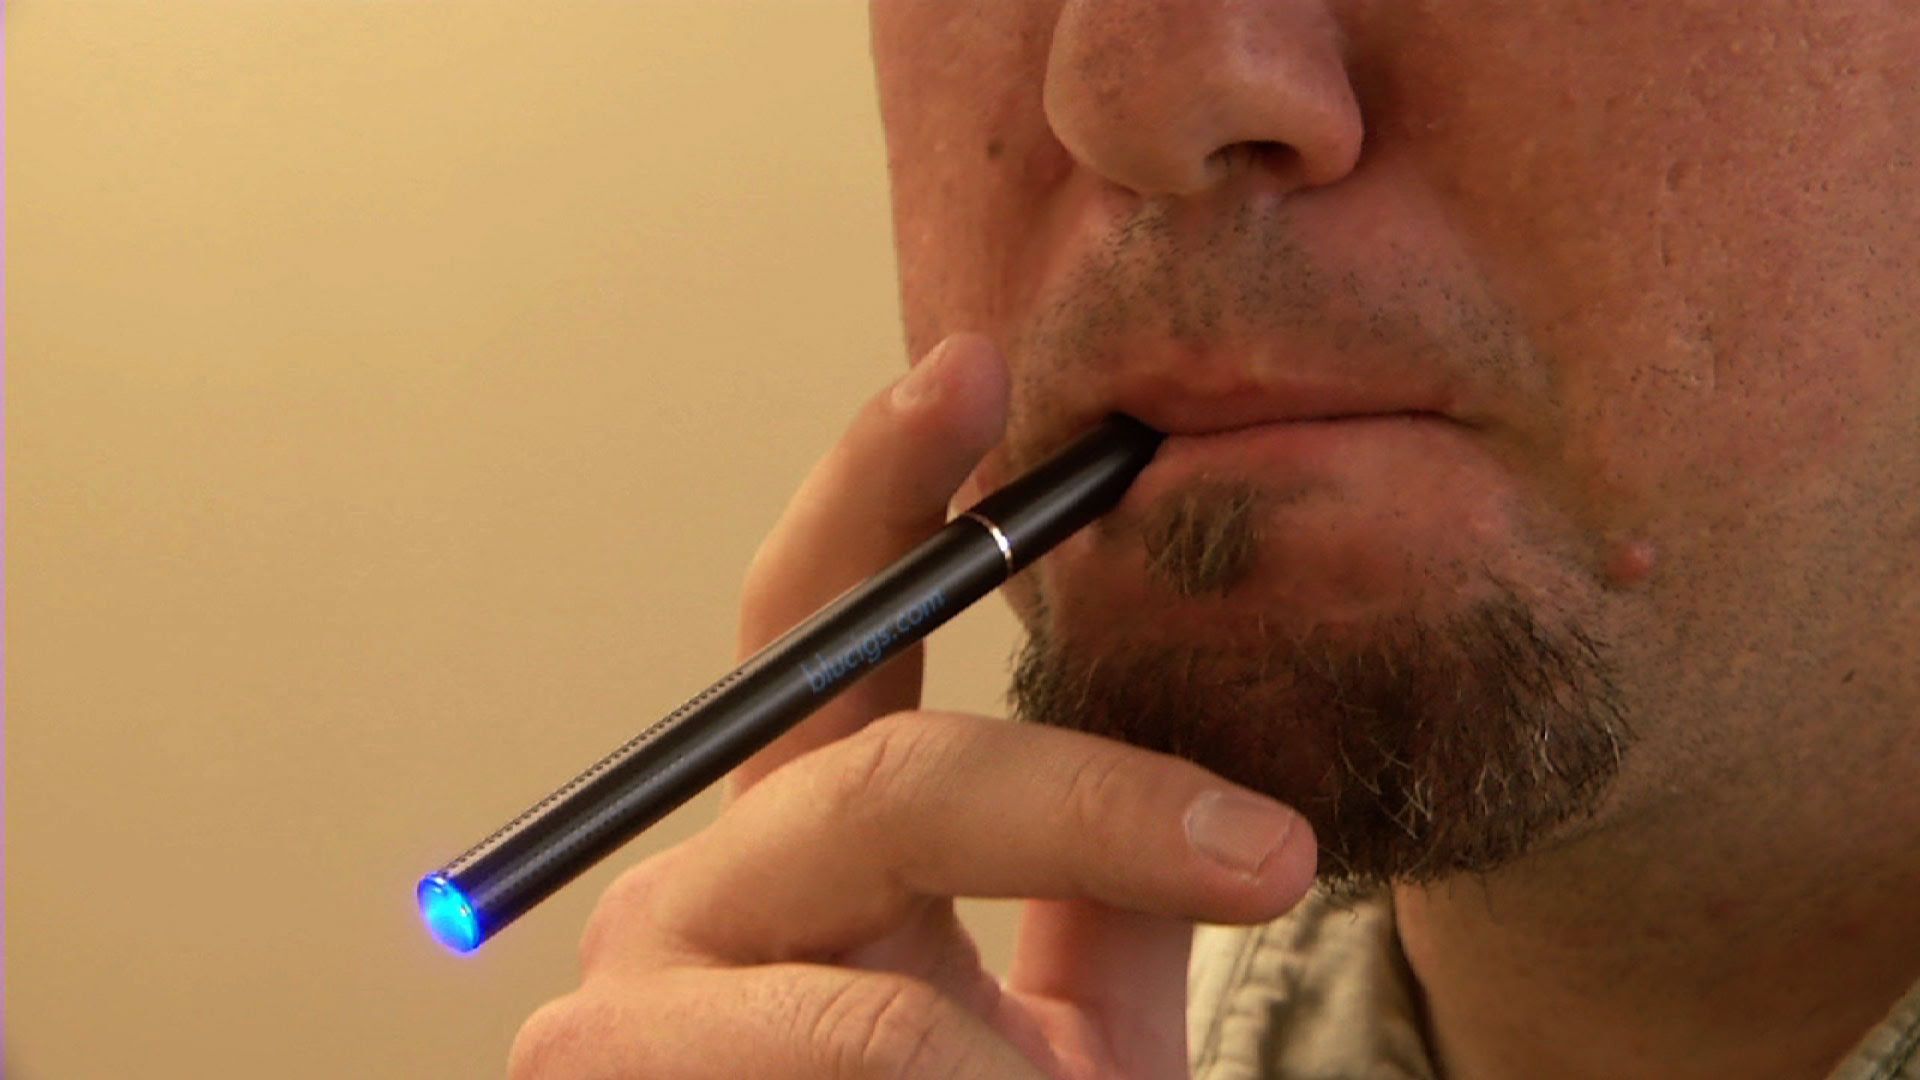 EU plans to classify e-cigarettes as tobacco products